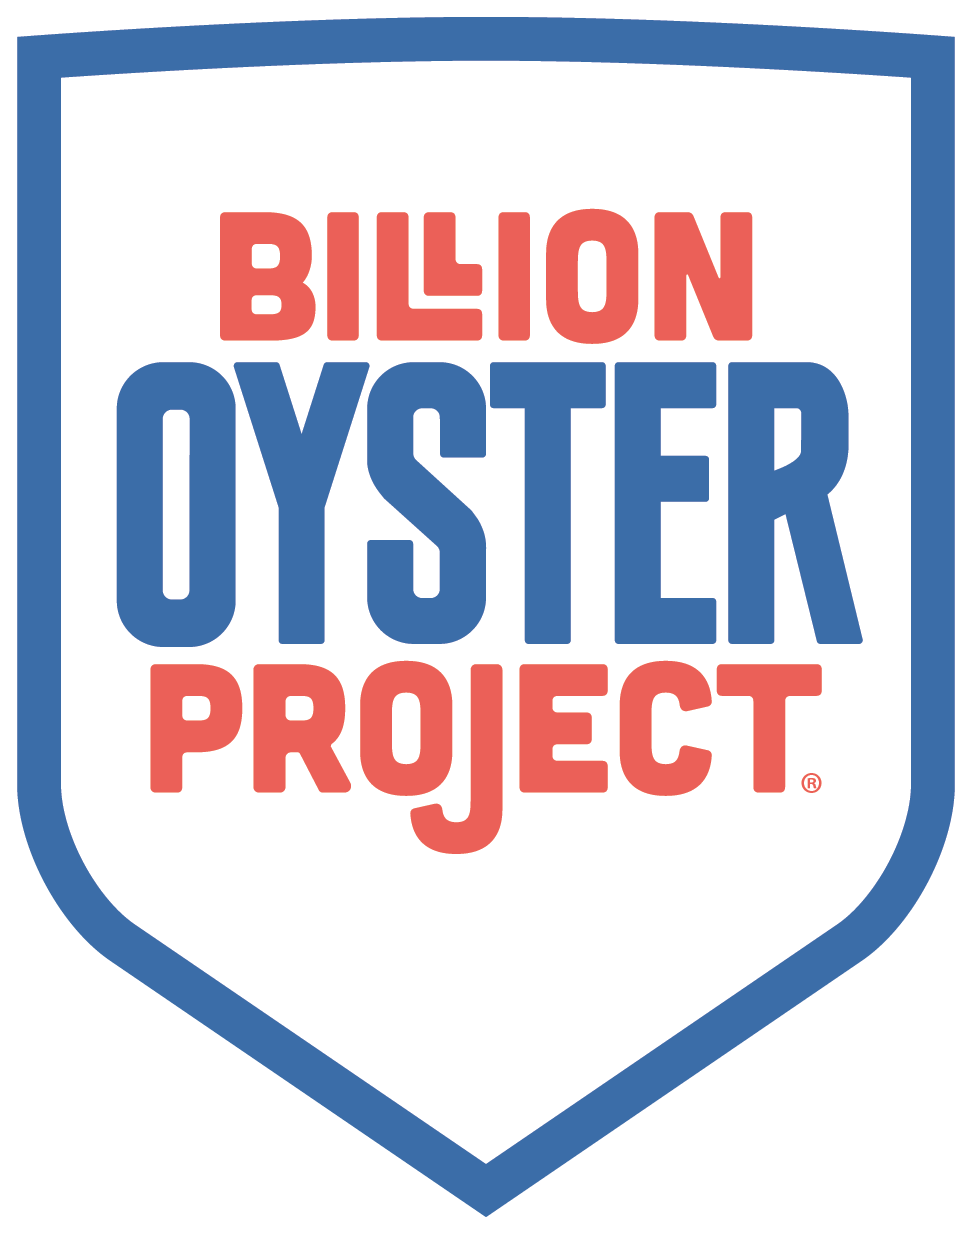 Billion Oyster Project logo.png